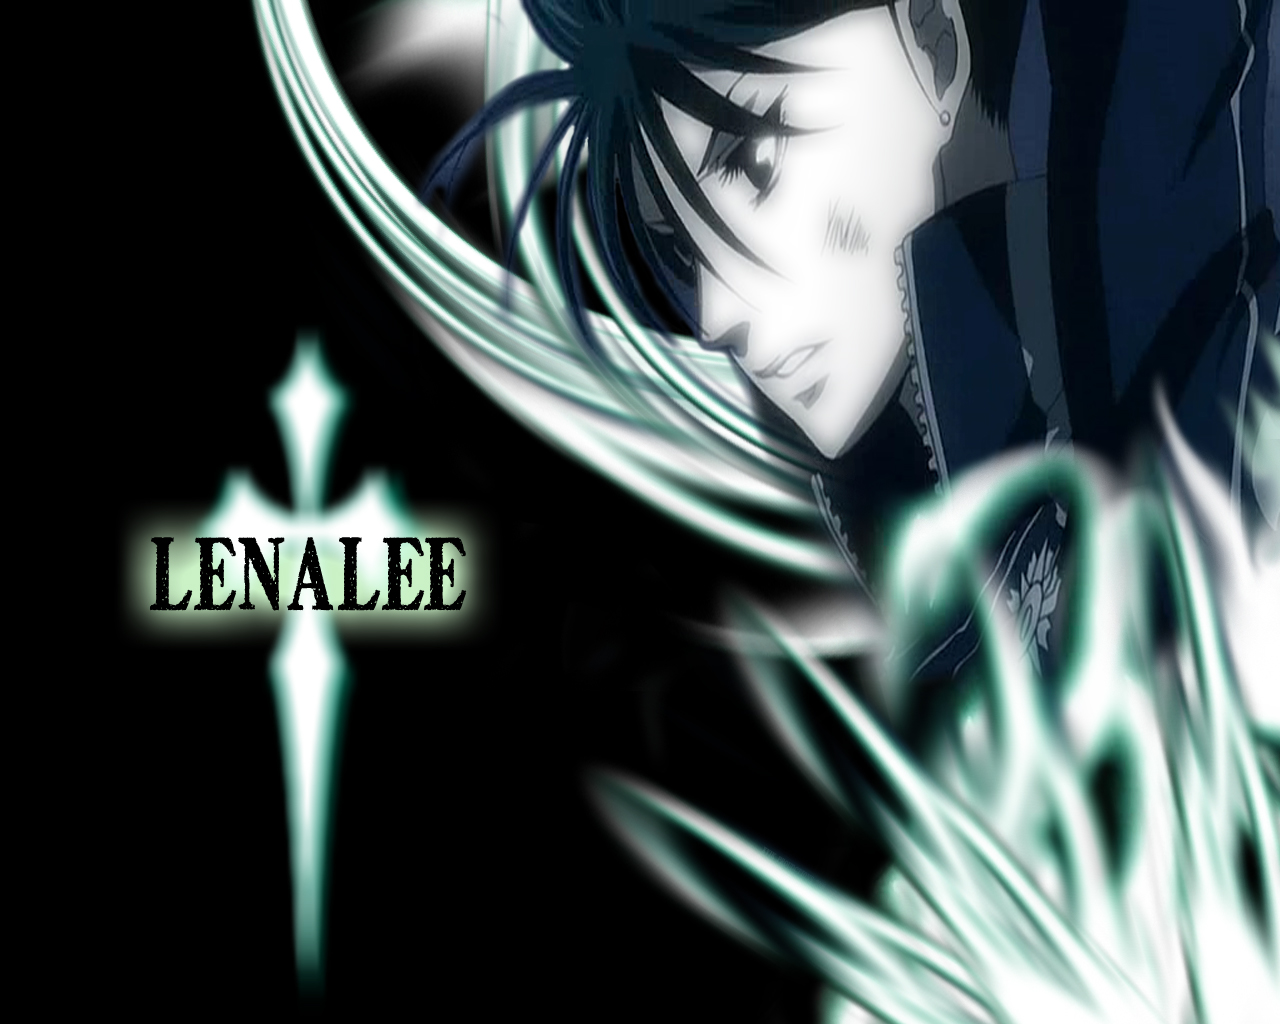 Lenalee By Psikro On Deviantart Images, Photos, Reviews